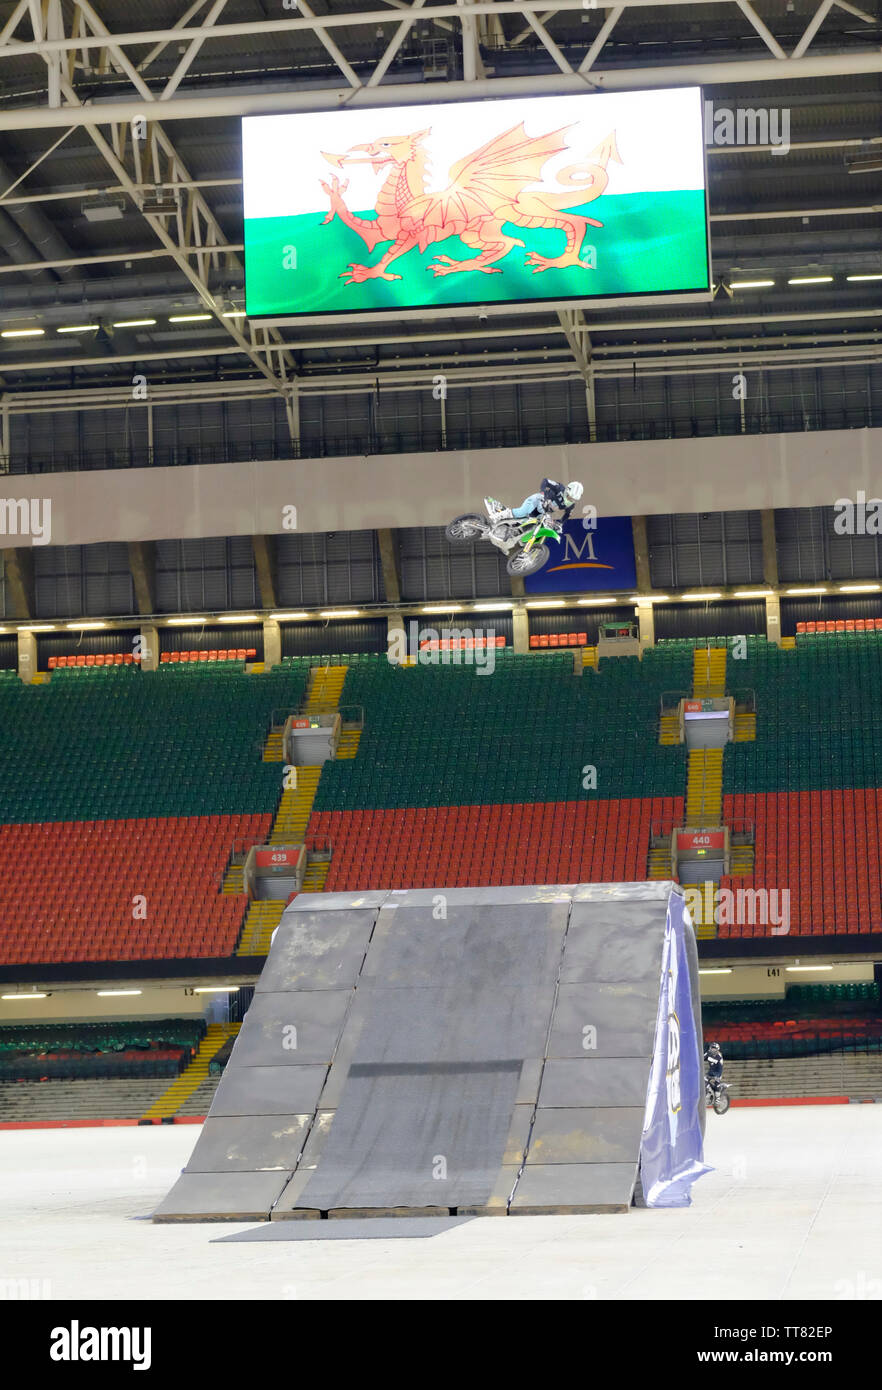 Nitro World Games Press conference st the Principality Stadium.A freestyle motocross rider executes a jump Stock Photo